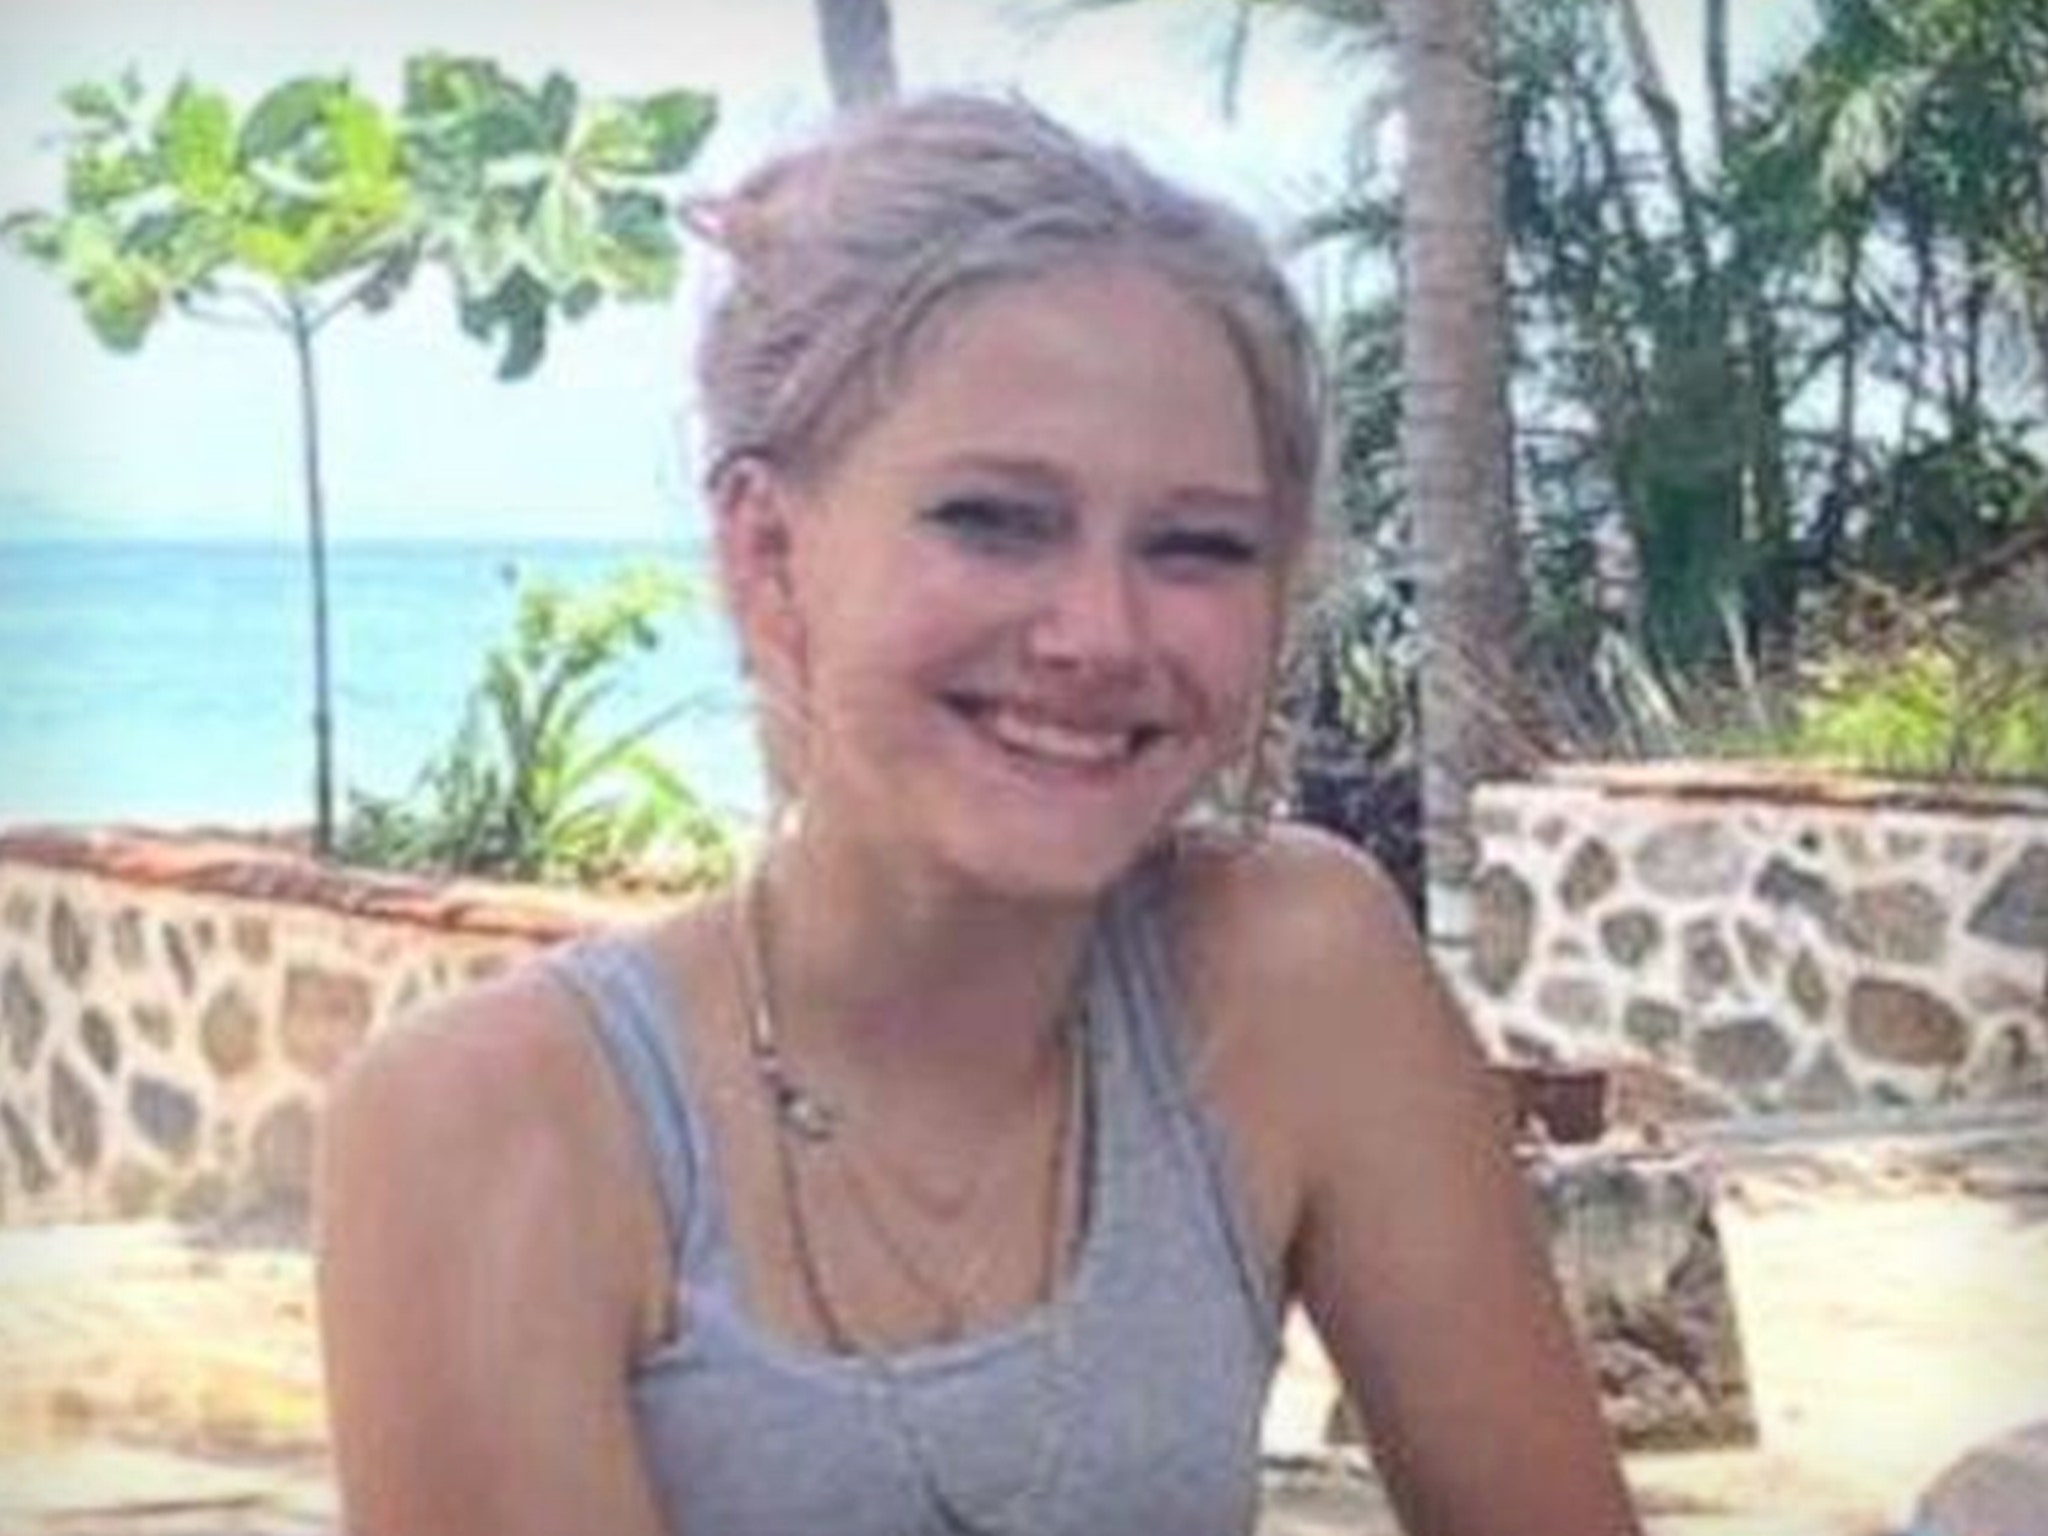 YouTube Rescue Dive Team Claims They’ve Found Missing Teen Kiely Rodni